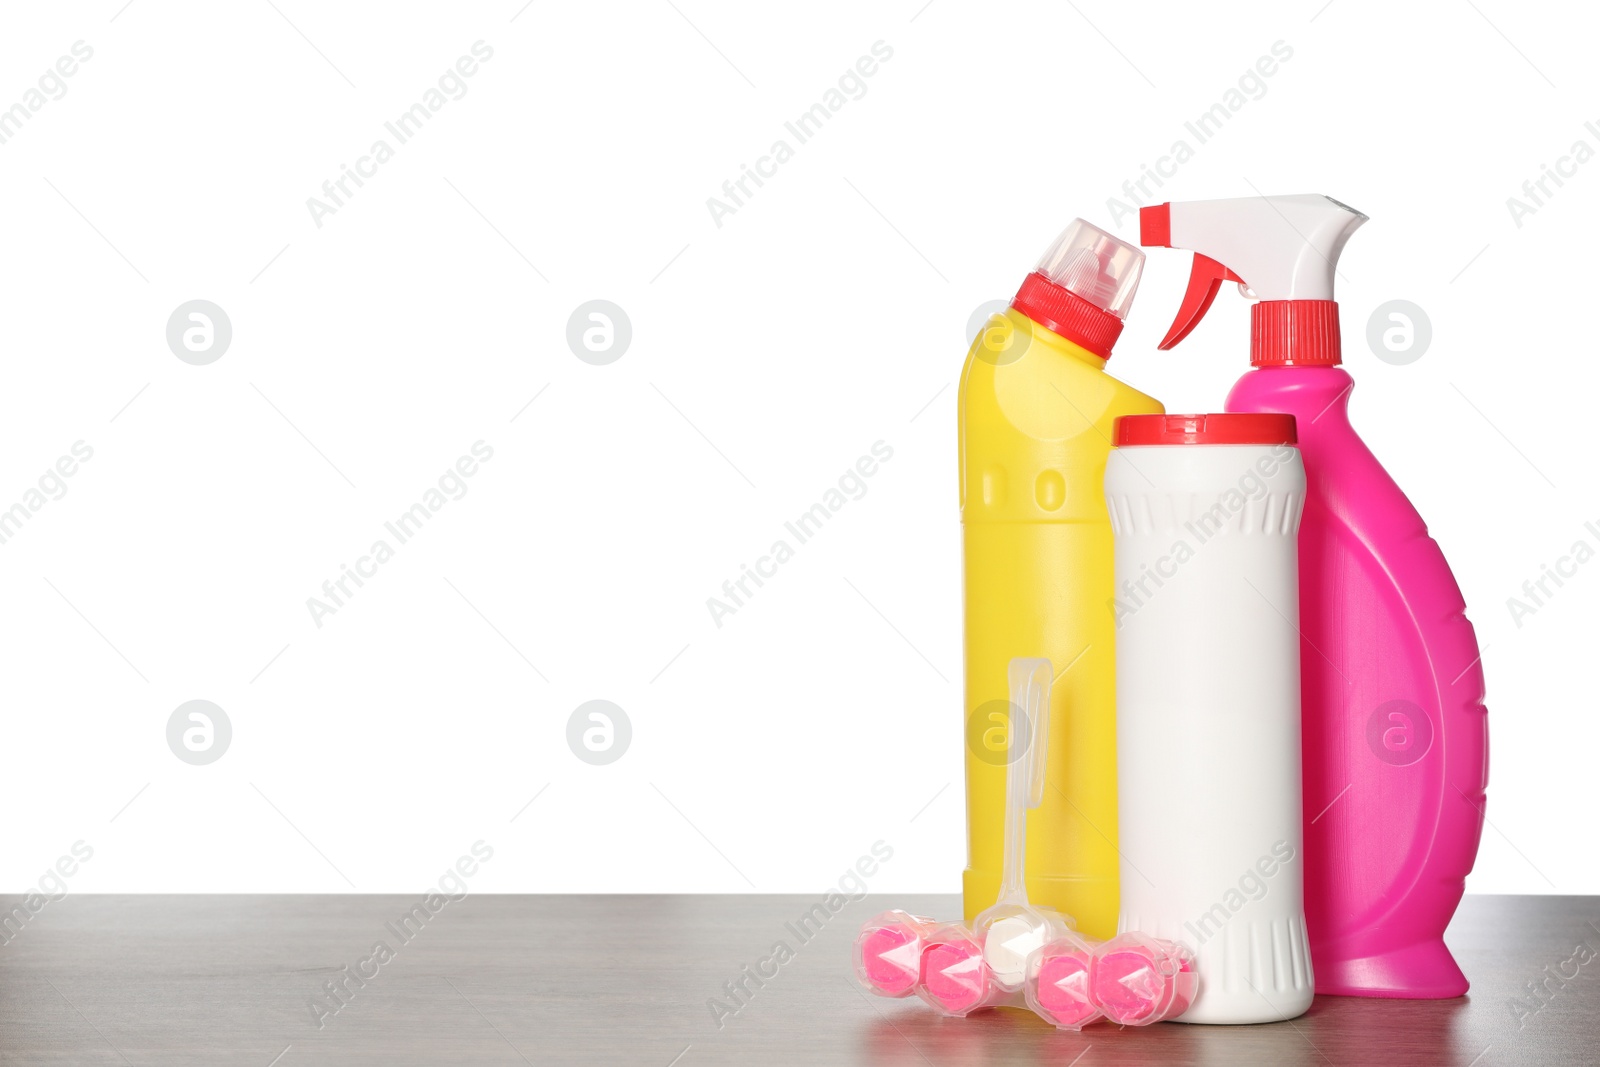 Photo of Different toilet cleaning tools on wooden table against white background